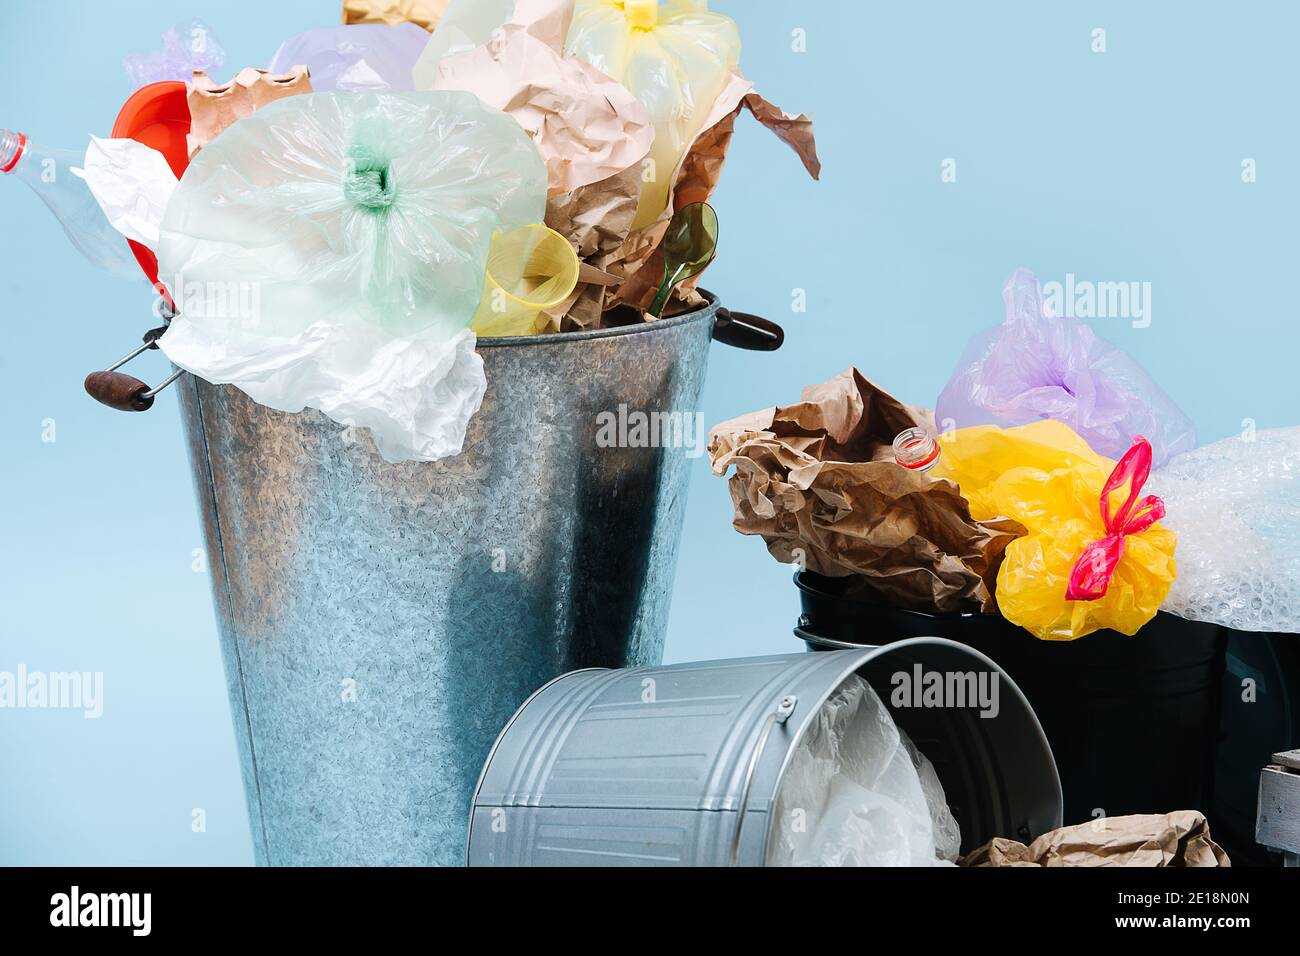 Recycling and ecology concept. Garbage cans filled with recycling waste. Stock Photo